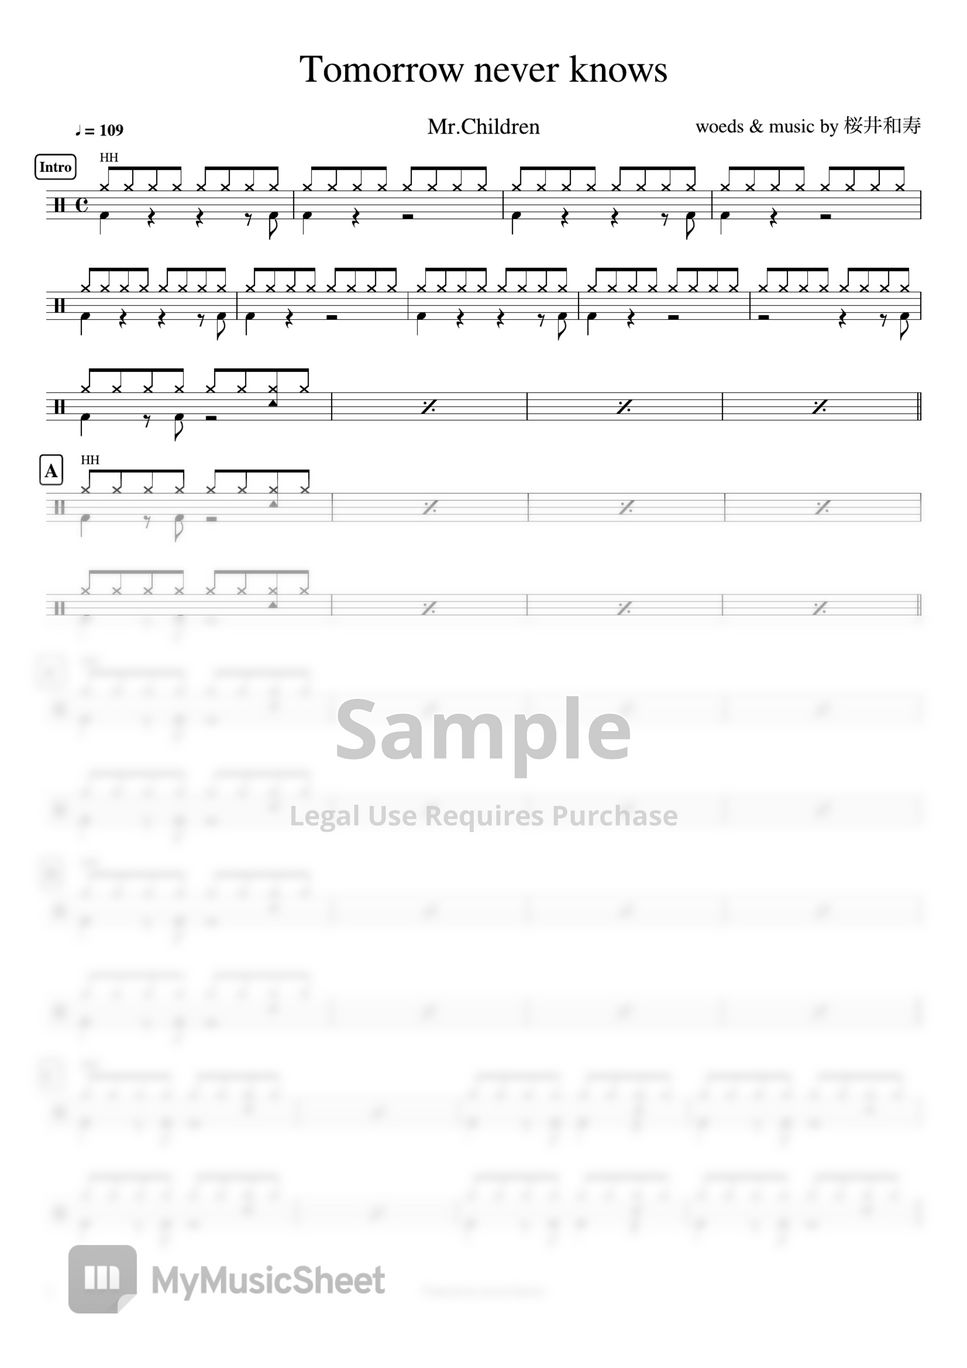 Mr.Children - Tomorrow never knows by Cookai's J-pop Drum sheet music!!!